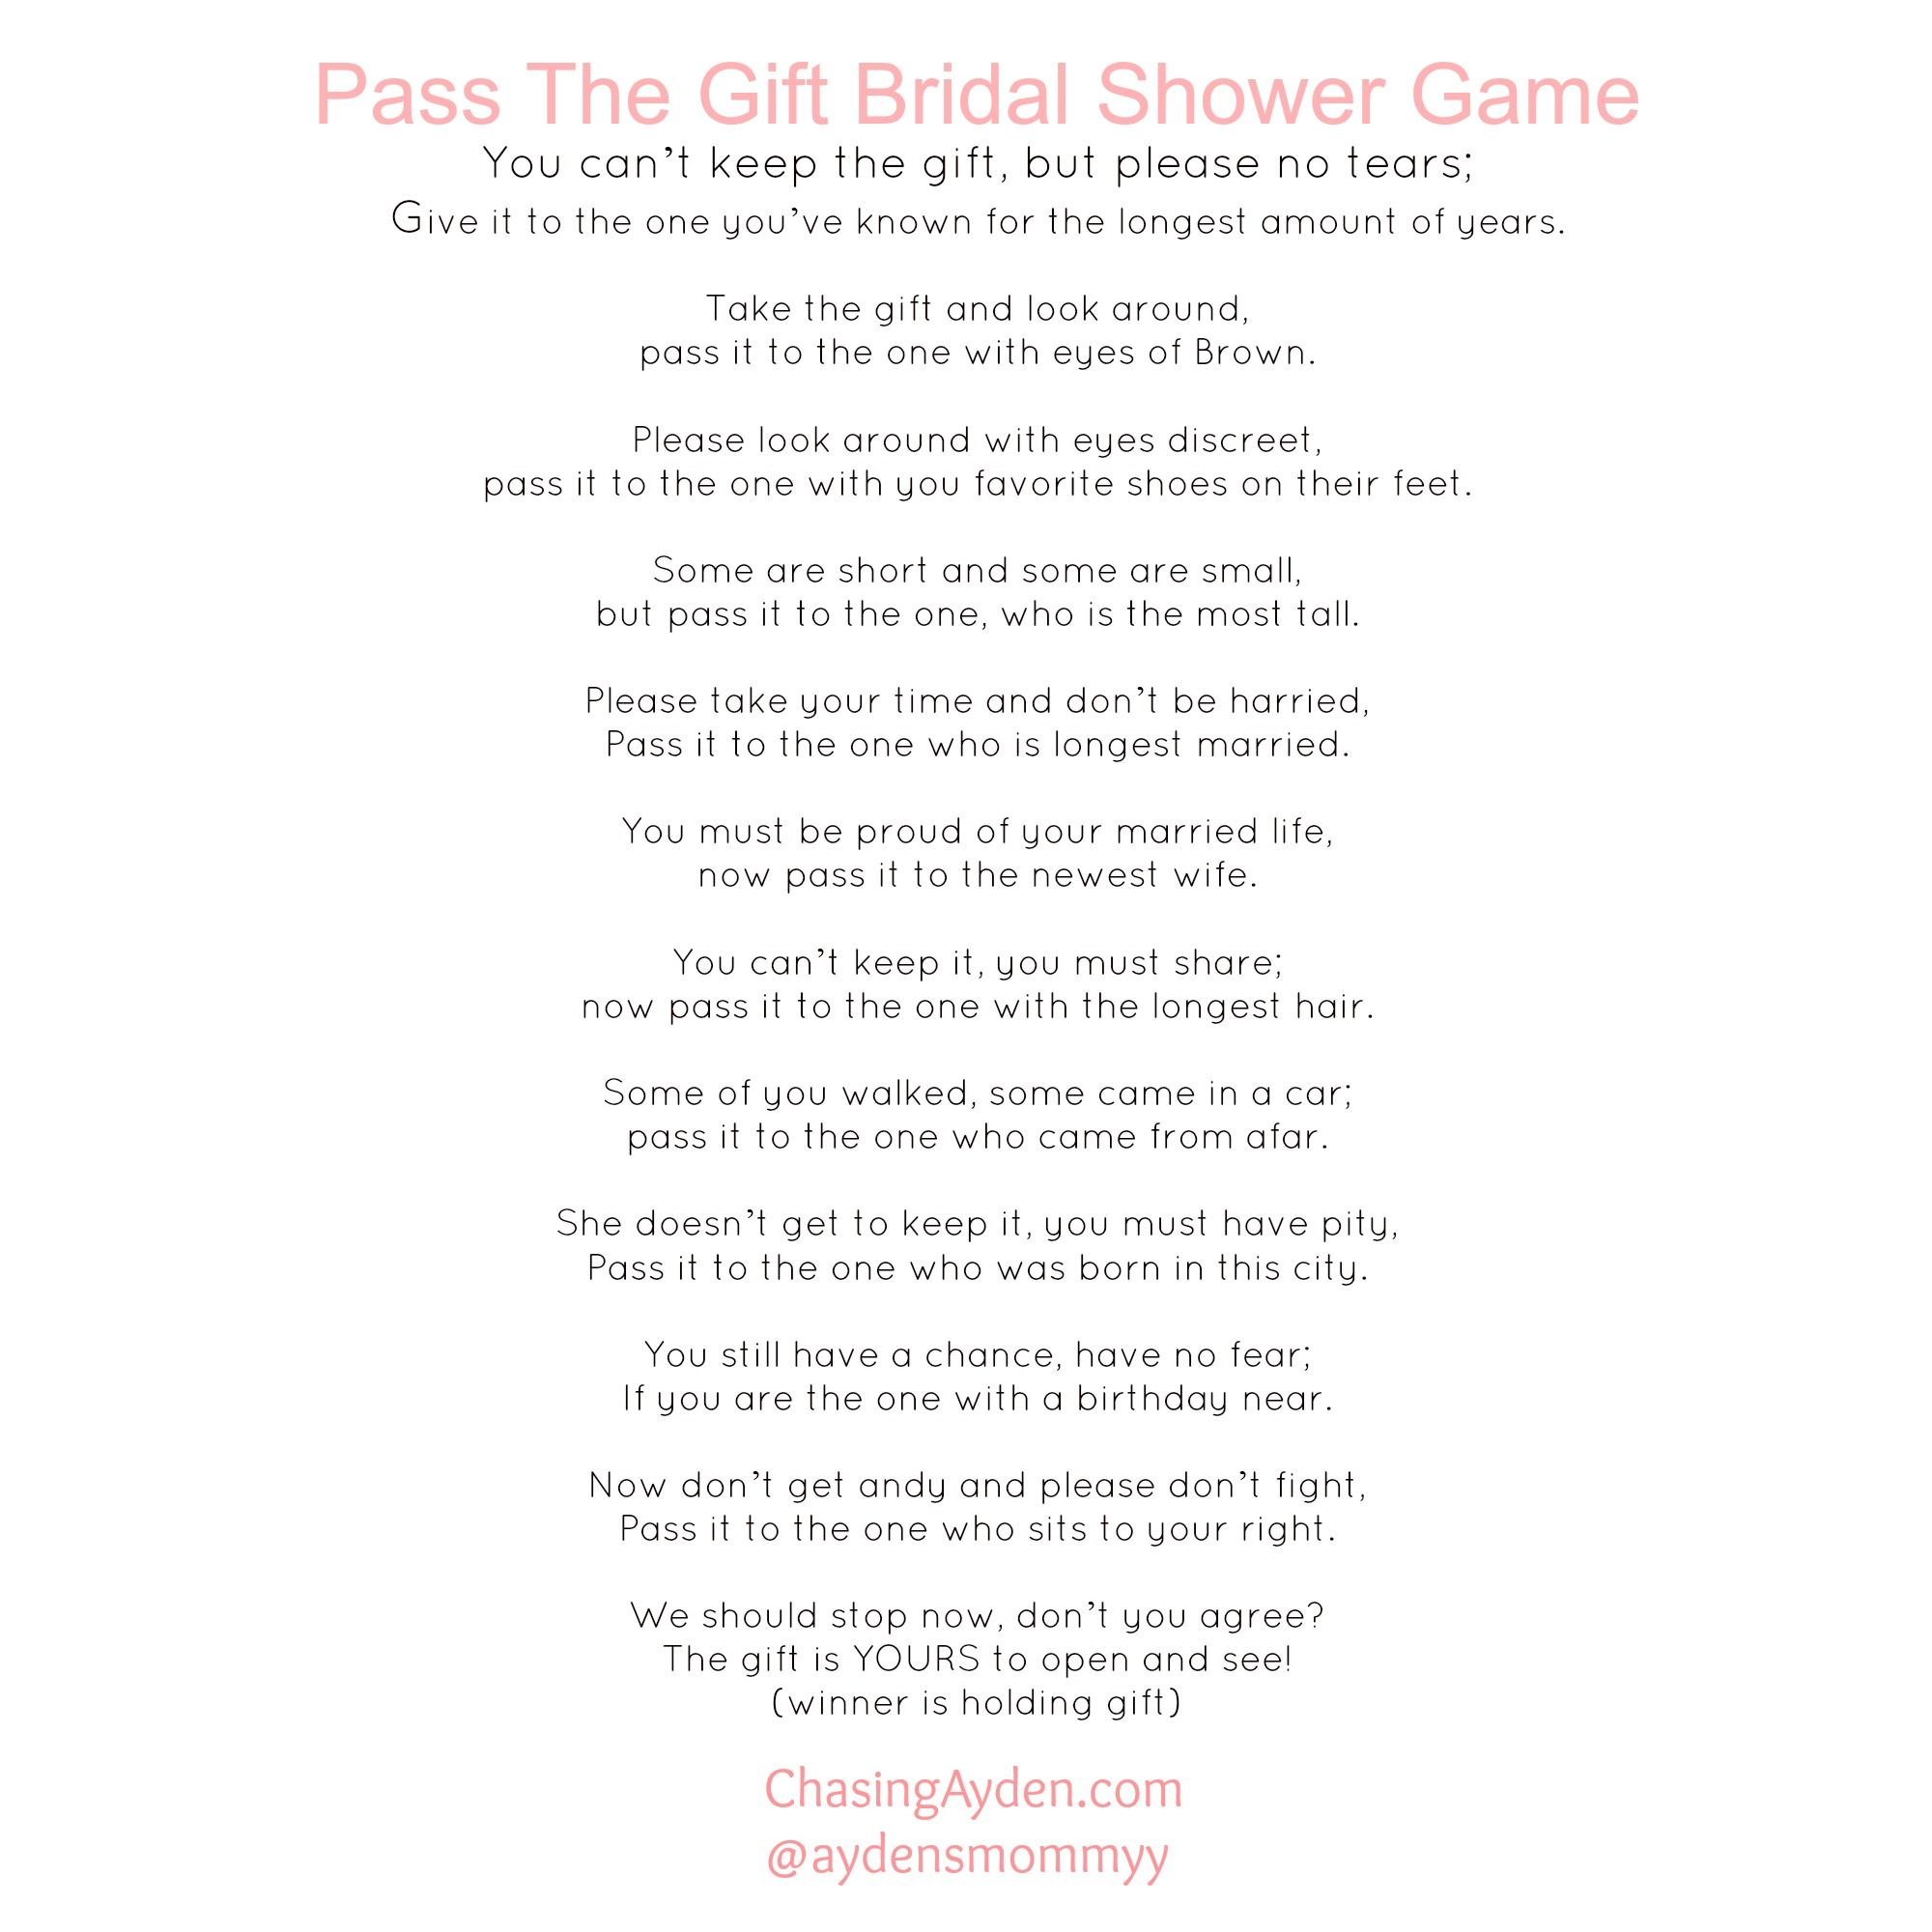 Pinchasing Mcallisters On My Events | Bridal Shower Games - Pass The Prize Baby Shower Game Free Printable